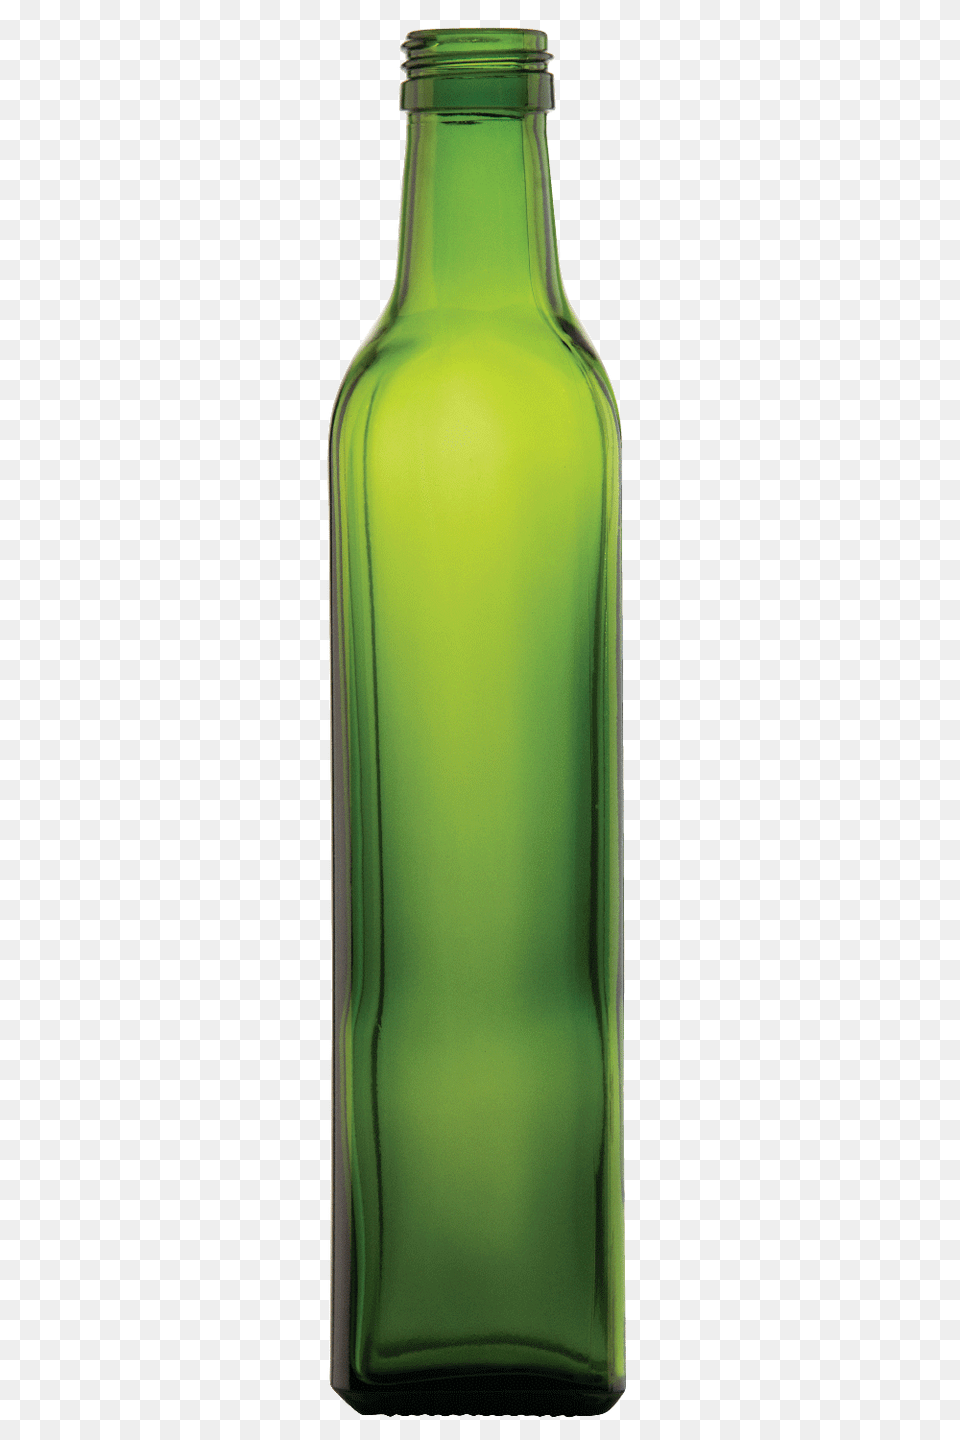 Catalog Aac Food, Bottle, Glass, Alcohol, Beer Png